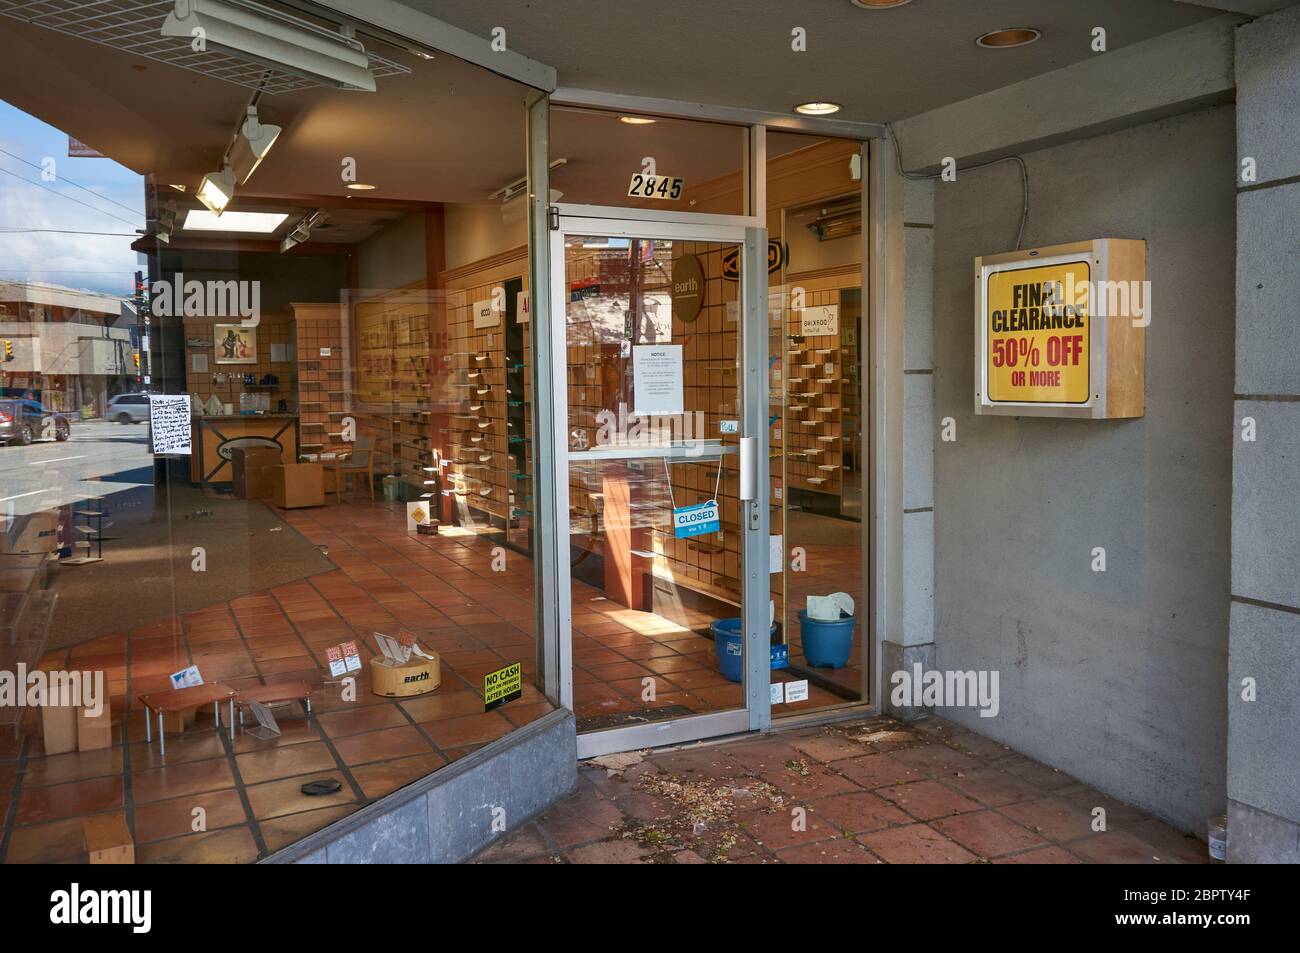 Vancouver, Canada, May 19, 2020. An empty store that has gone out of business due to economic hardship caused by the the COVID-19 pandemic. Stock Photo